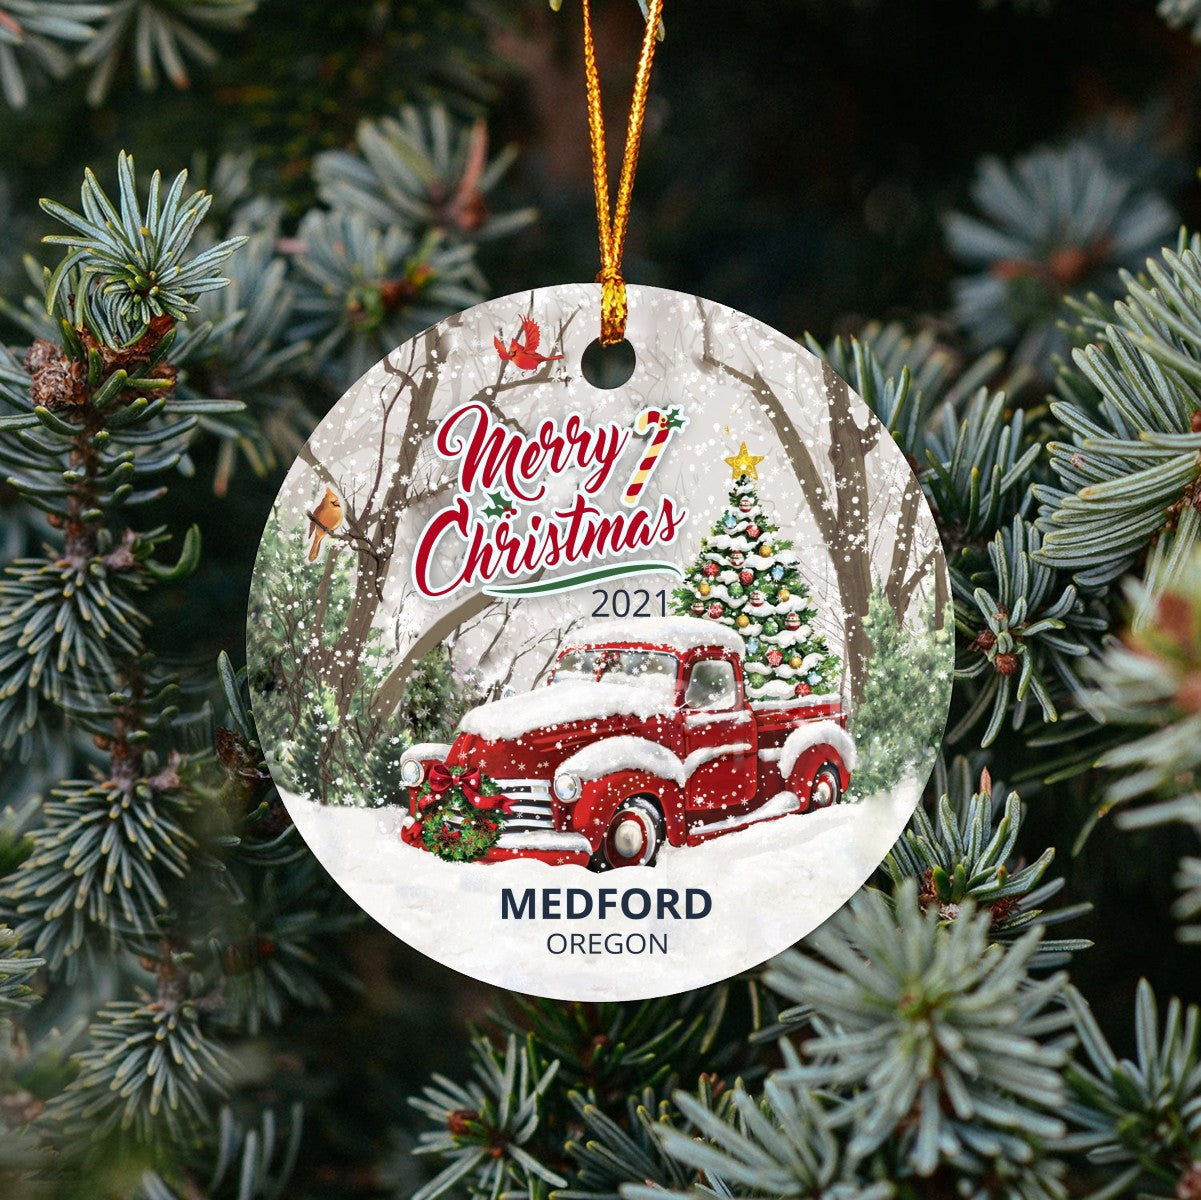 Christmas Tree Ornaments Medford - Ornament Customize With Name City And State Medford Oregon OR - Red Truck Xmas Ornaments 3'' Plastic Gift For Family, Friend And Housewarming